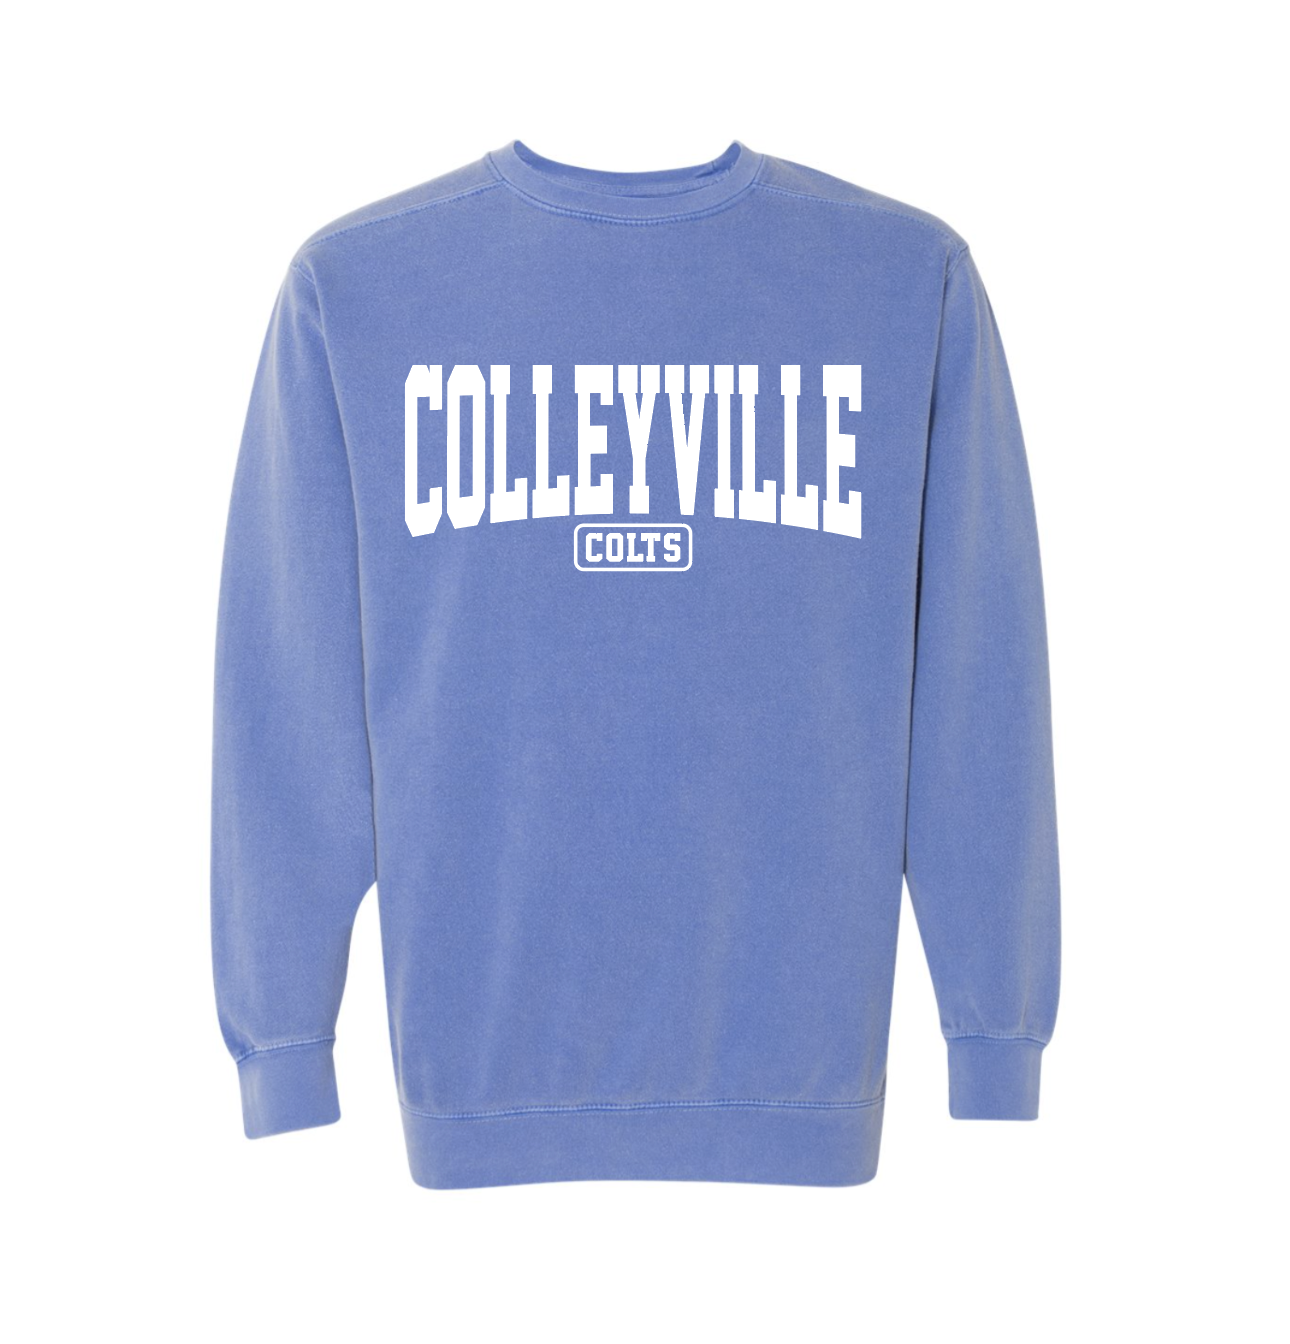 Colts Come Up Crew Sweatshirt by Comfort Colors in Washed Blue ...